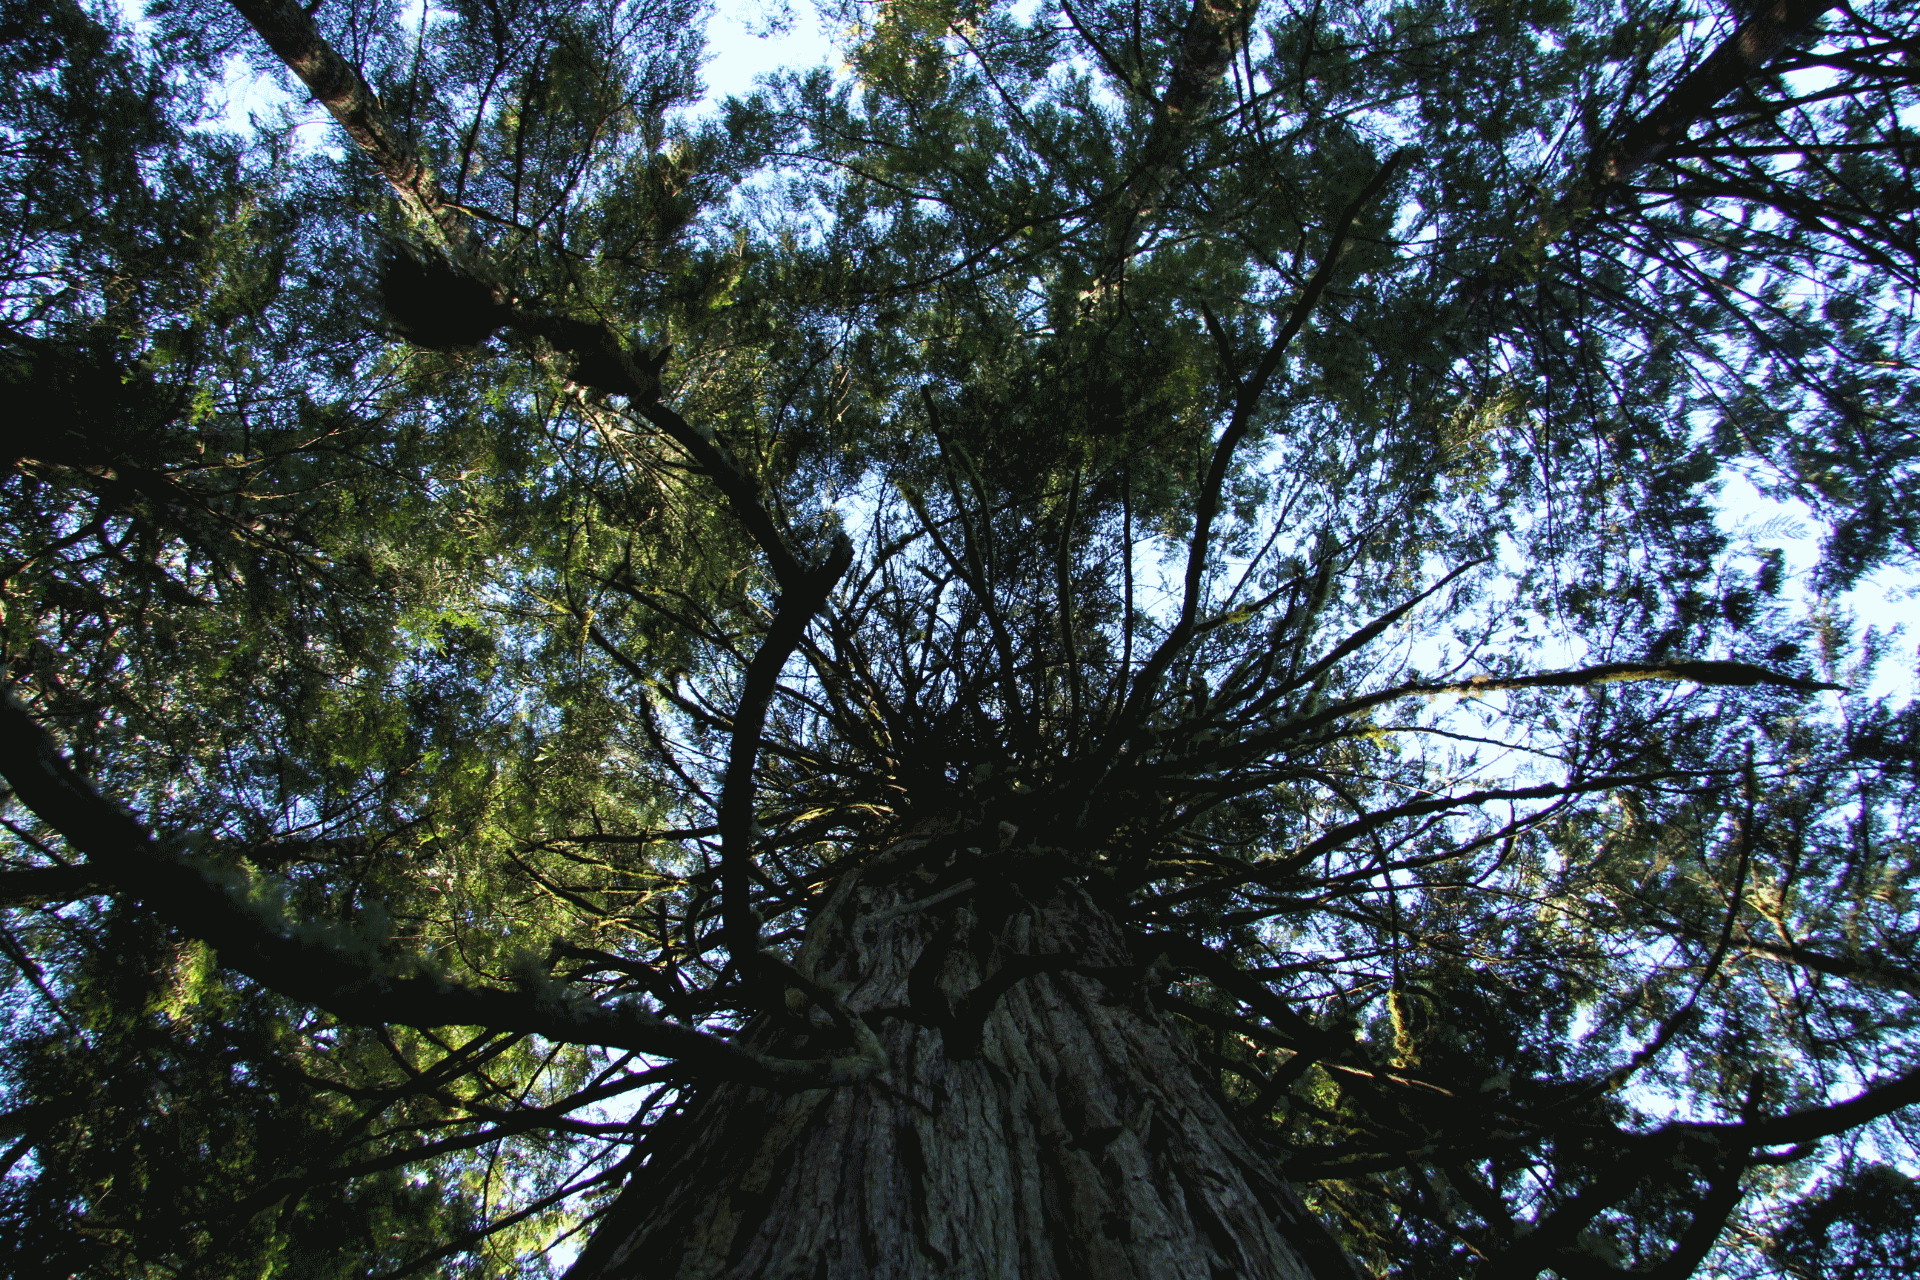 Zenith perspective taken from the ground looking up to the canopy of an old growth tree on Vancouver Island, British Columbia. Pickell, CC-BY-SA-4.0.